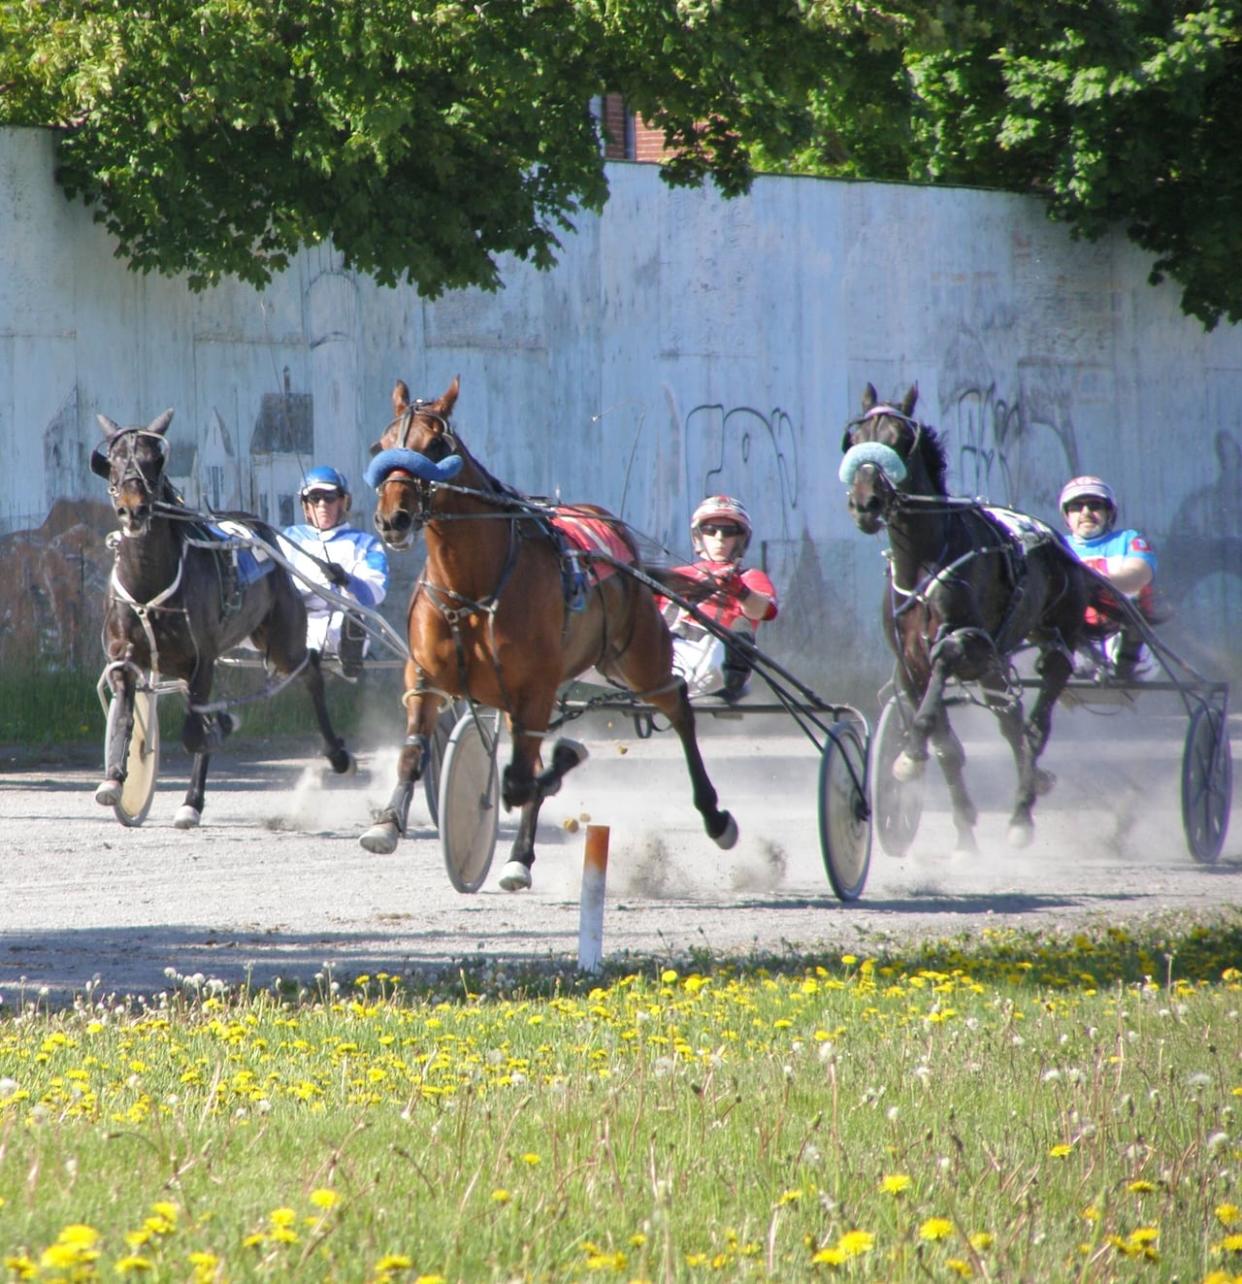 Under the zoning bylaw changes, the New Brunswick Exhibition Grounds can't be used as a racetrack, and horse racing is not a permitted activity. (Fredericton Raceway/Facebook - image credit)